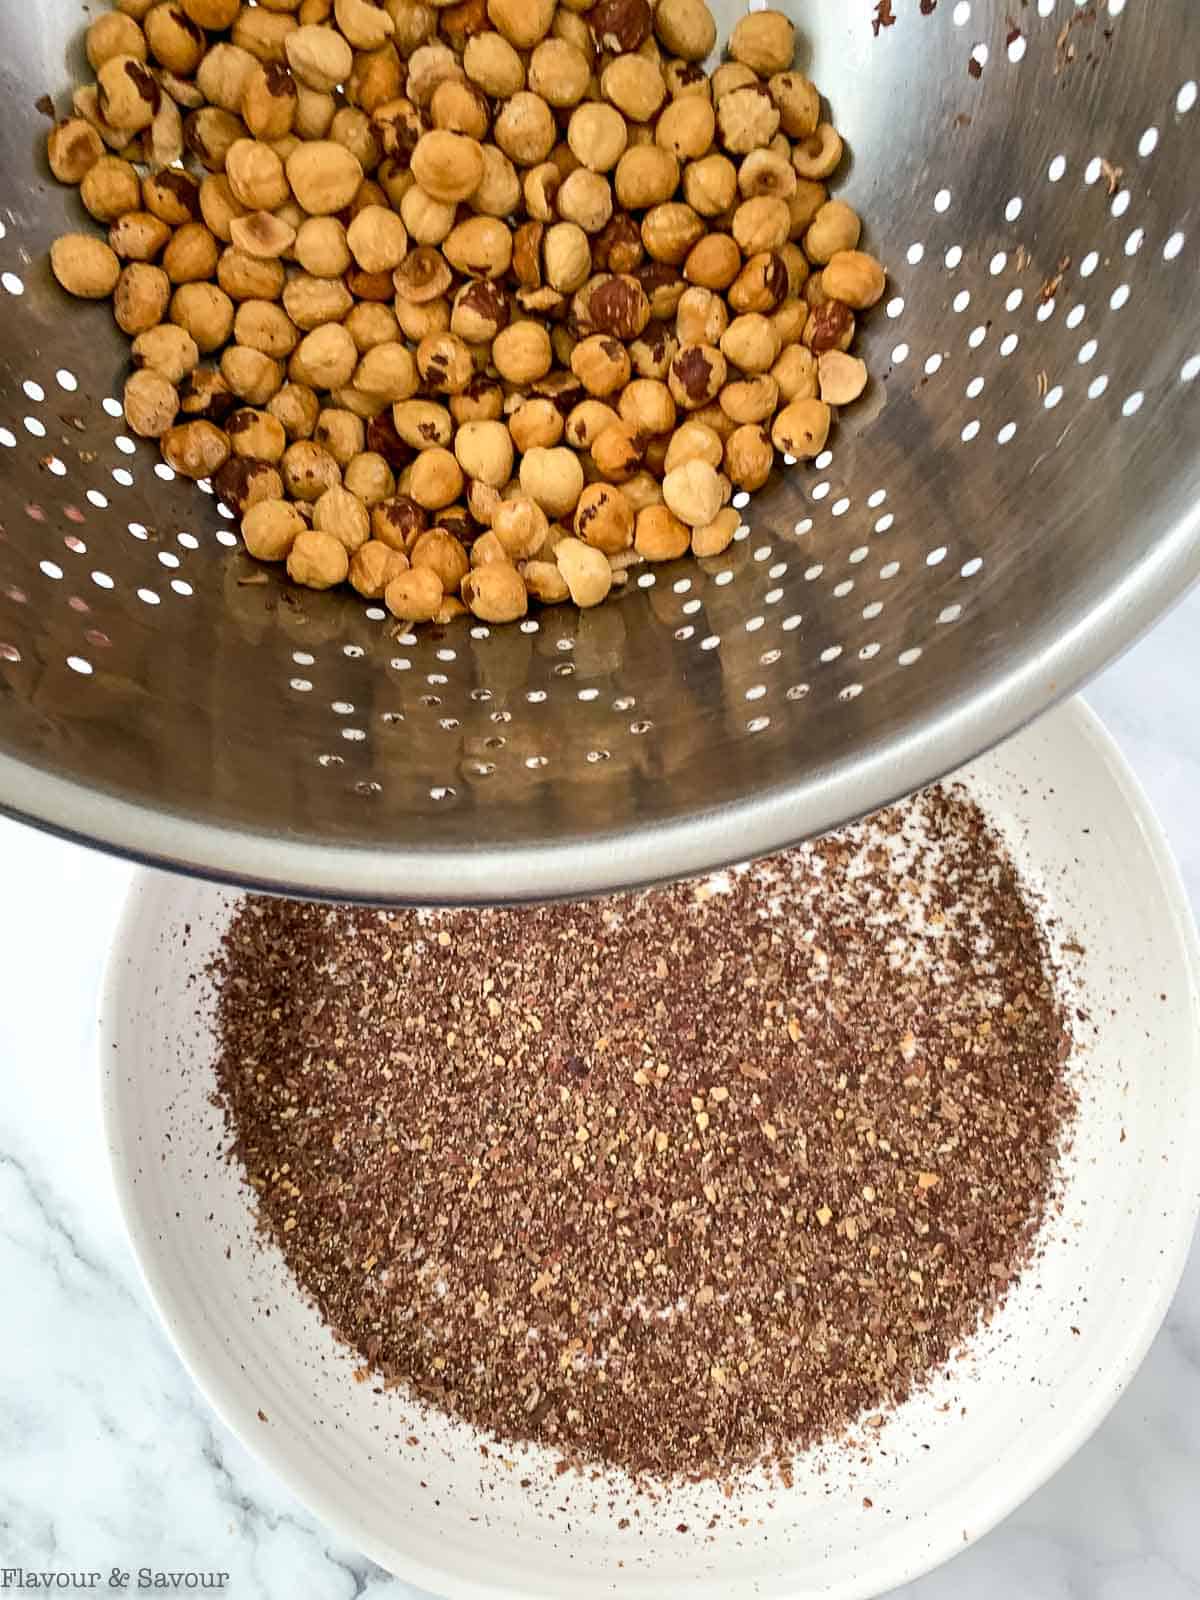 Separate hazelnuts from their skins by shaking them in a sieve.